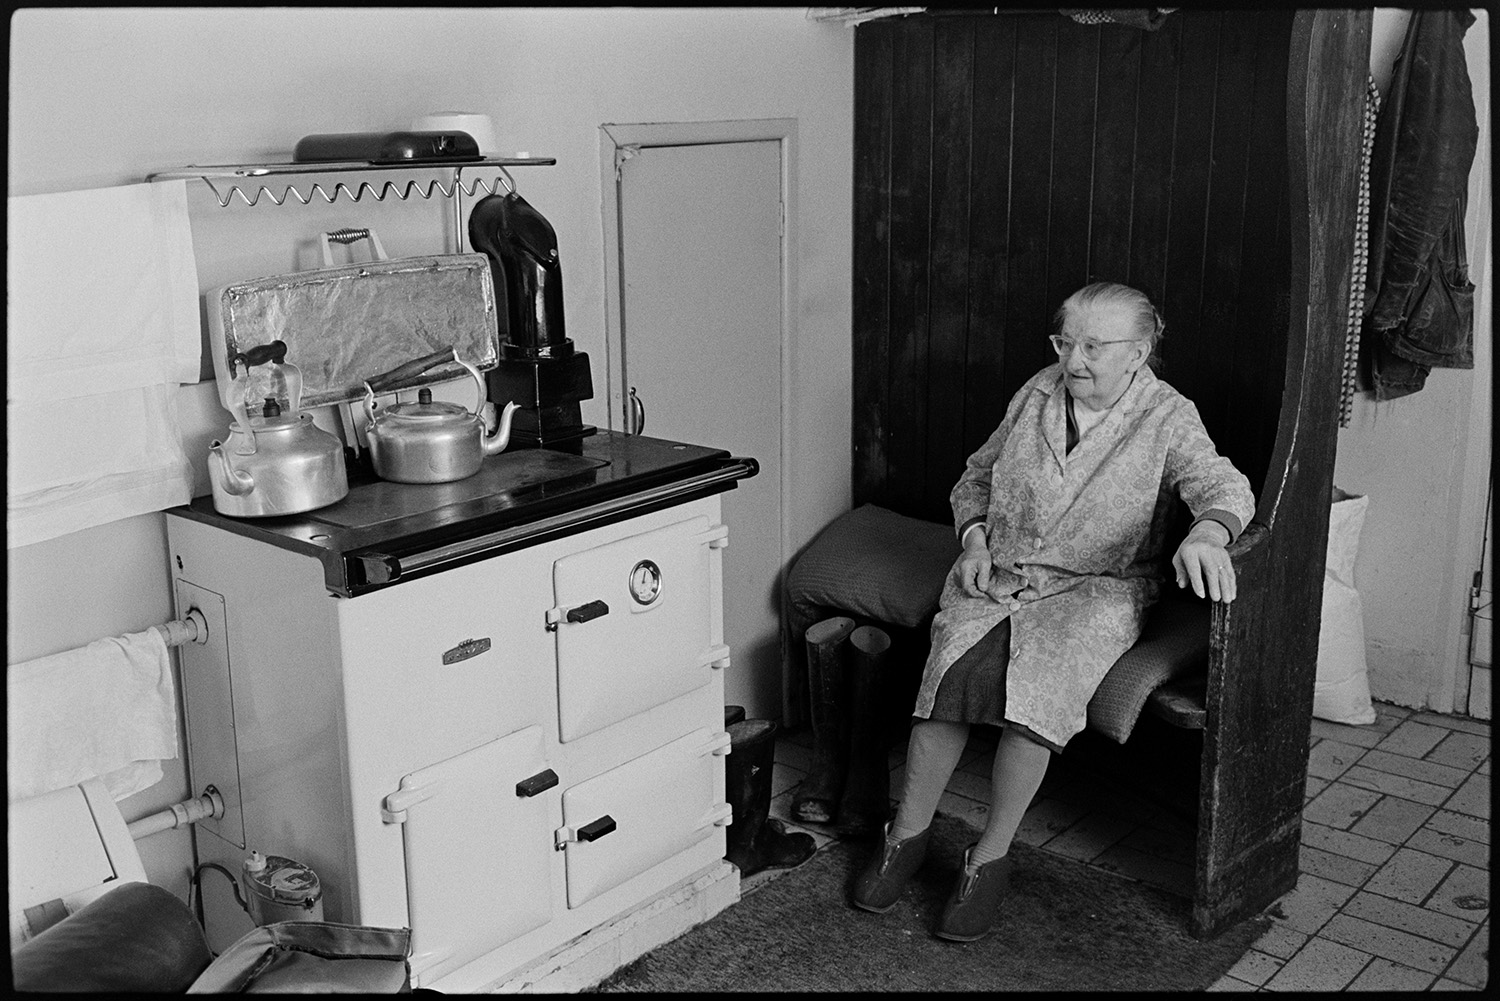 Elderly woman sitting beside Rayburn stove in kitchen. Kettles, china dishes. 
[A woman sitting on a settle bench by a rayburn stove in a kitchen. Two kettles are on the stove.]